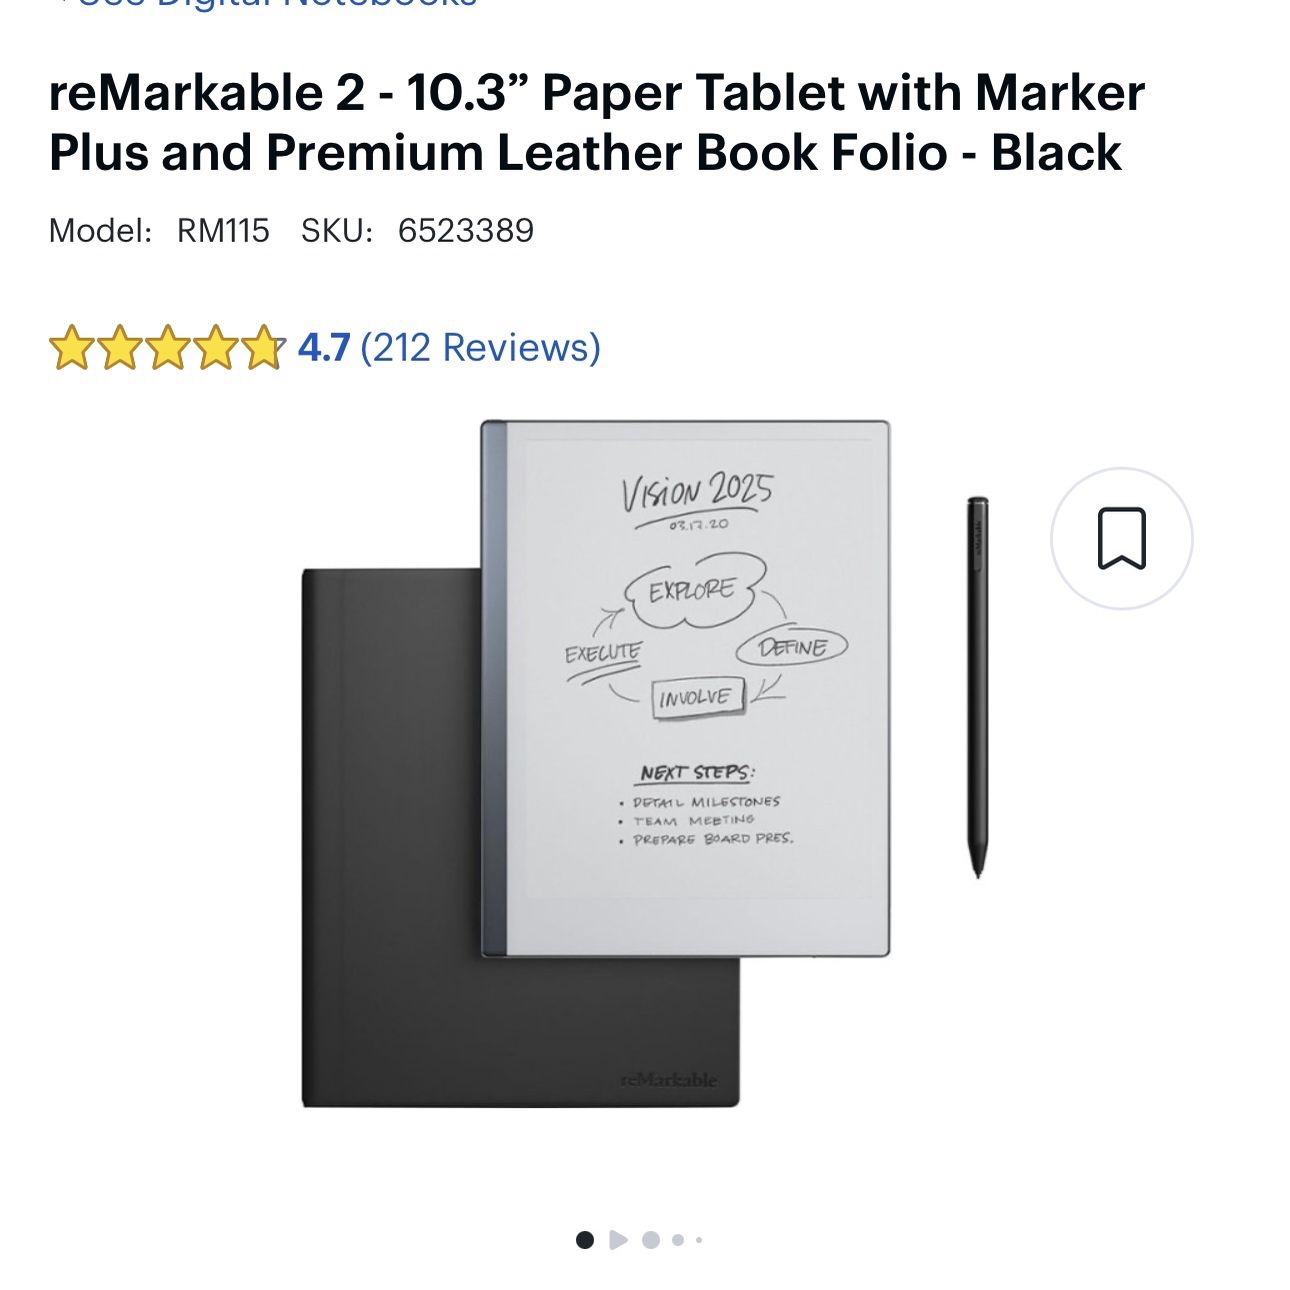 reMarkable 2 - 10.3" Paper Tablet with Marker Plus and Premium Leather Book Folio - Black